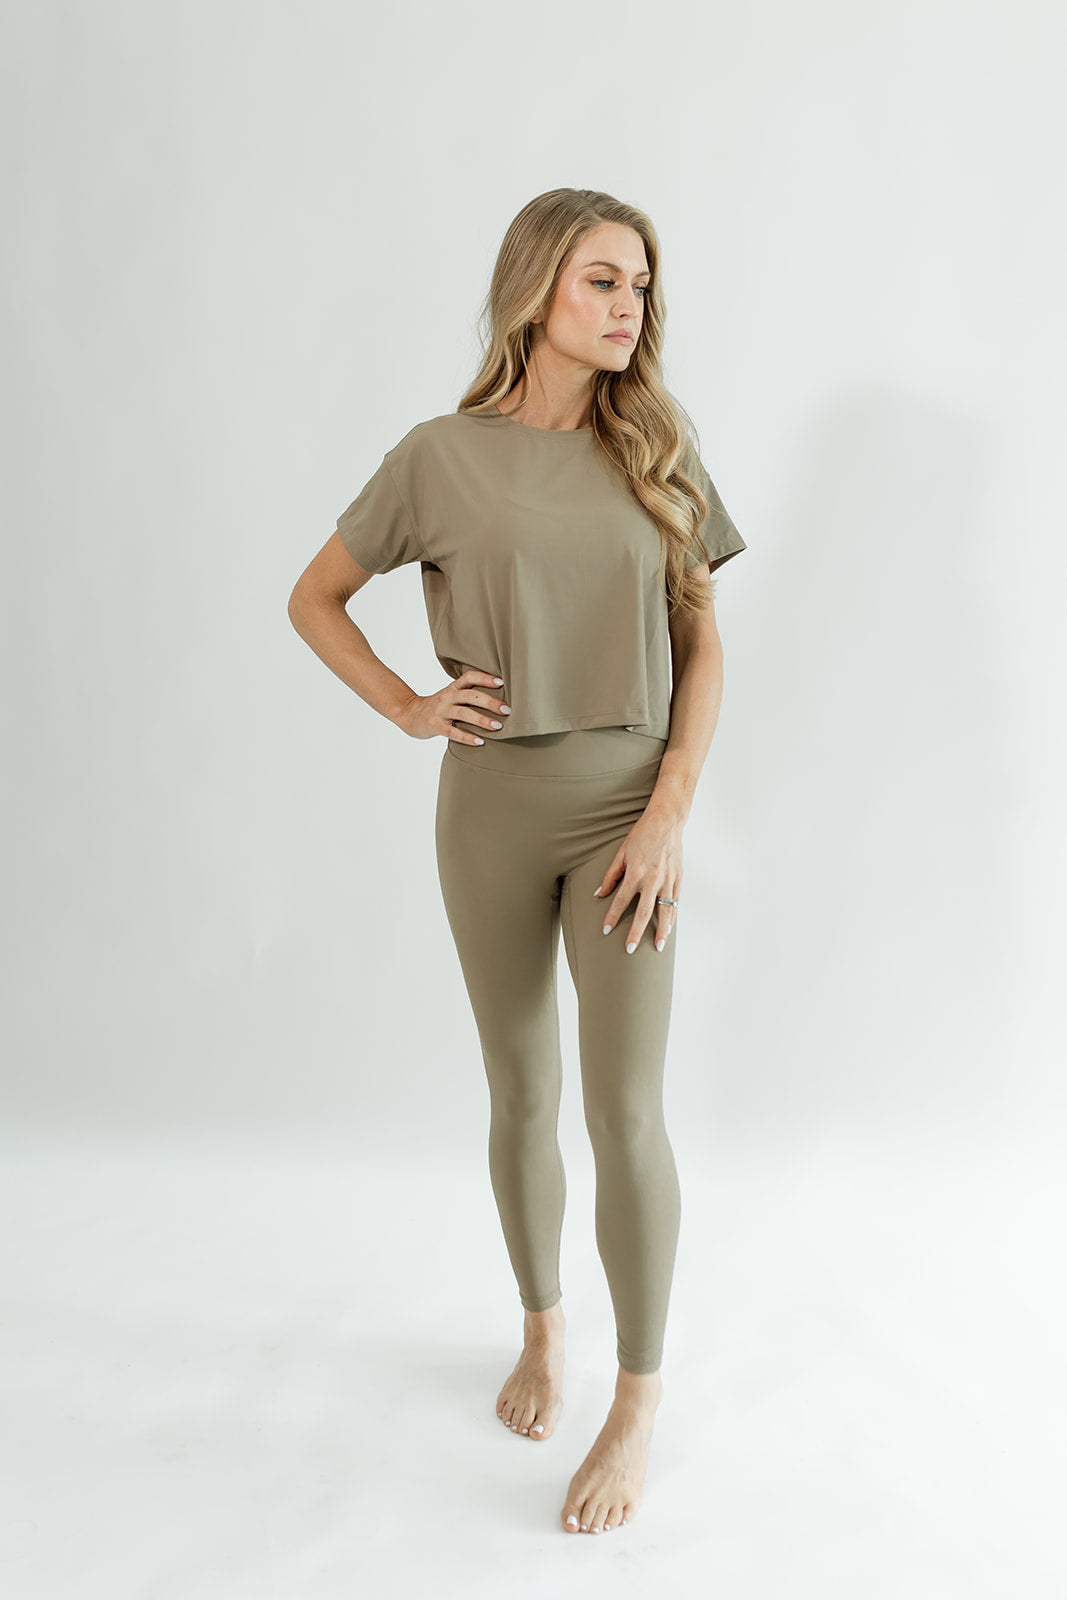 Sand/tan cropped flight tee paired with Volare leggings